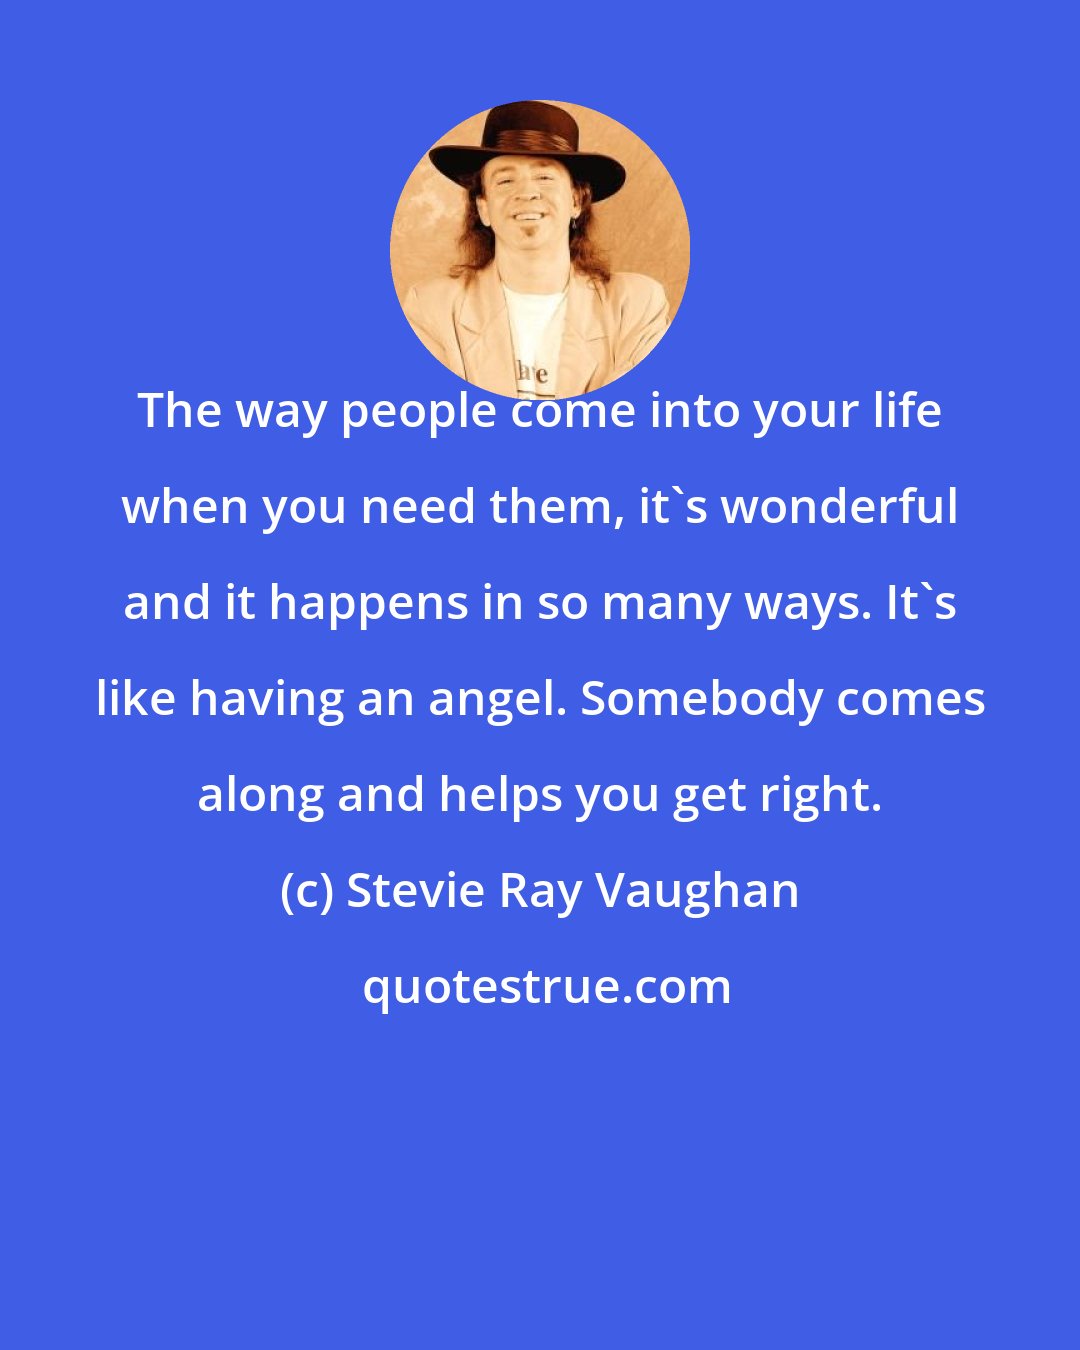 Stevie Ray Vaughan: The way people come into your life when you need them, it's wonderful and it happens in so many ways. It's like having an angel. Somebody comes along and helps you get right.